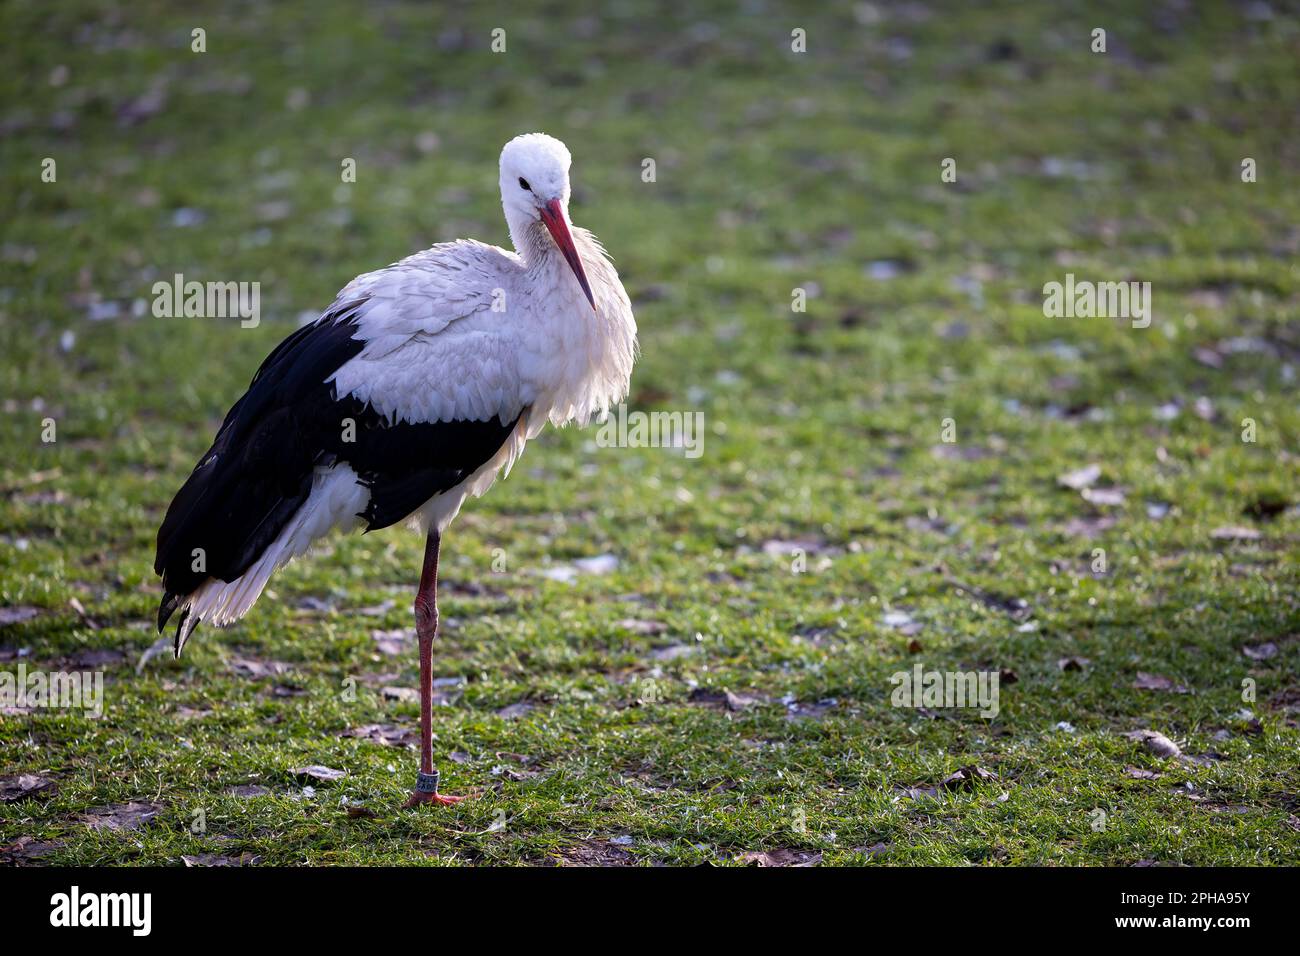 Storks walking on the grass in search of food. An enclosure for injured birds at the zoo Stock Photo